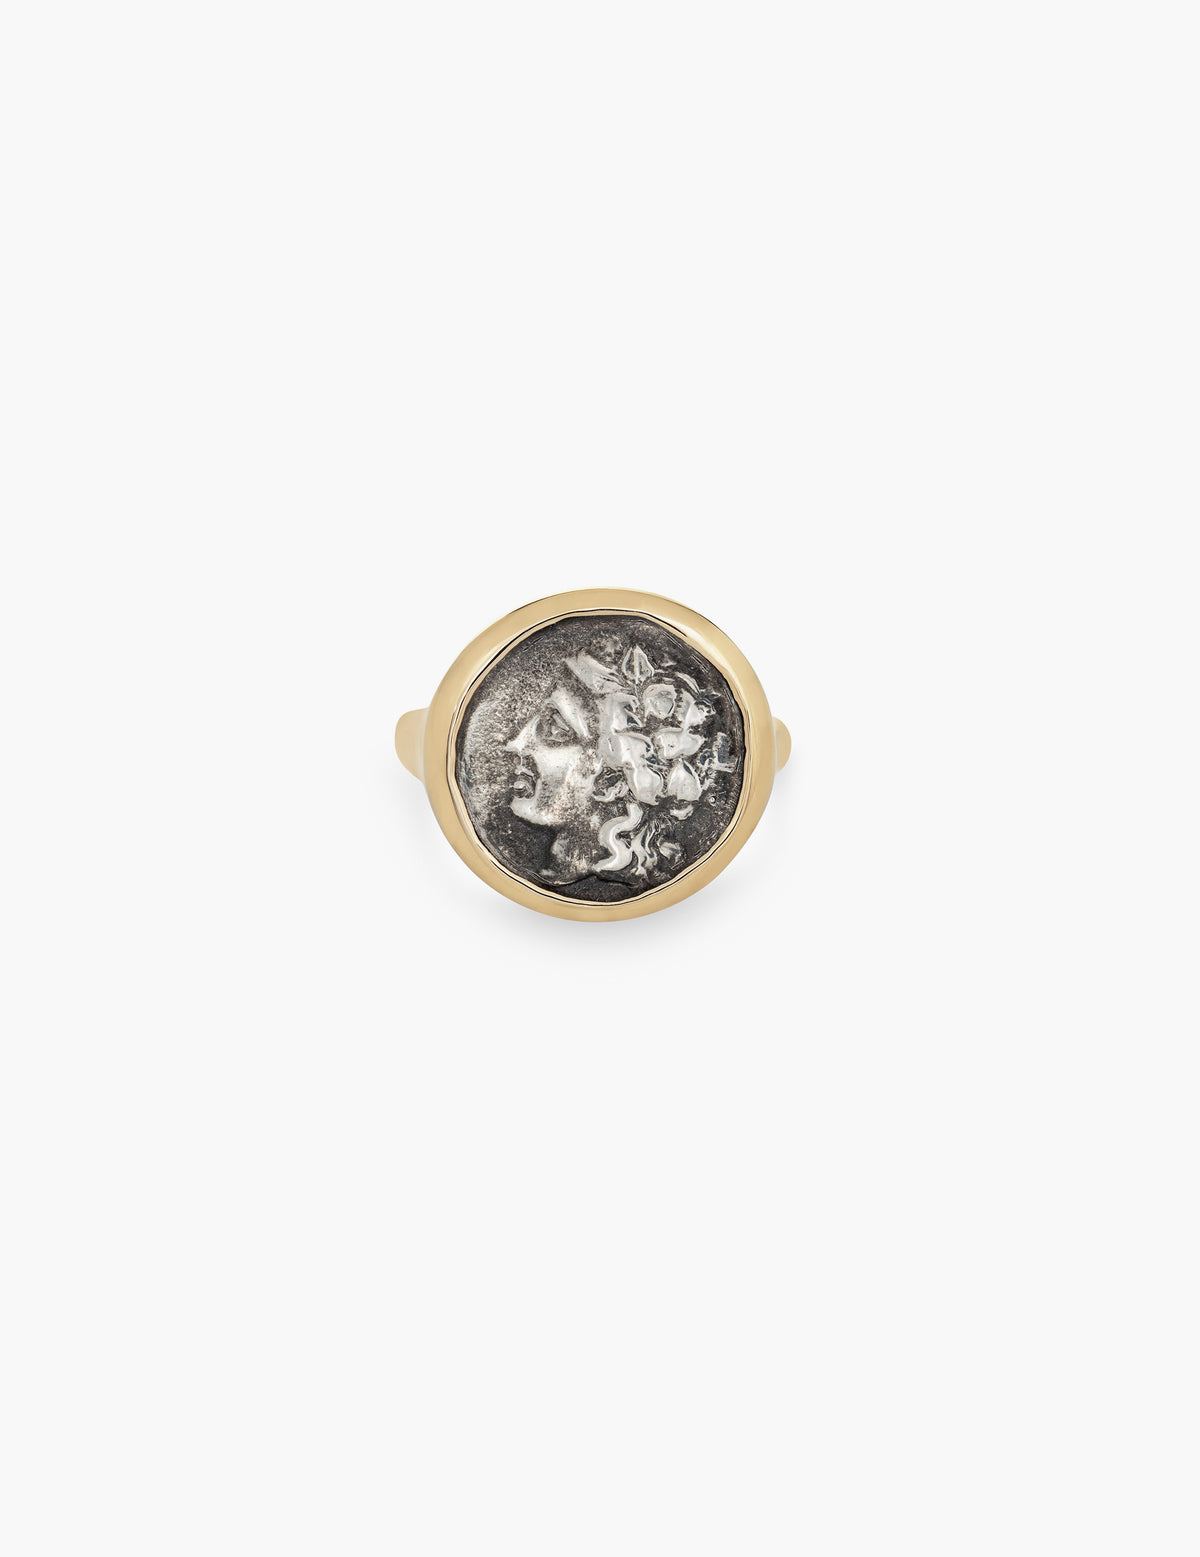 Dionysus Ring in Gold and Sterling Silver